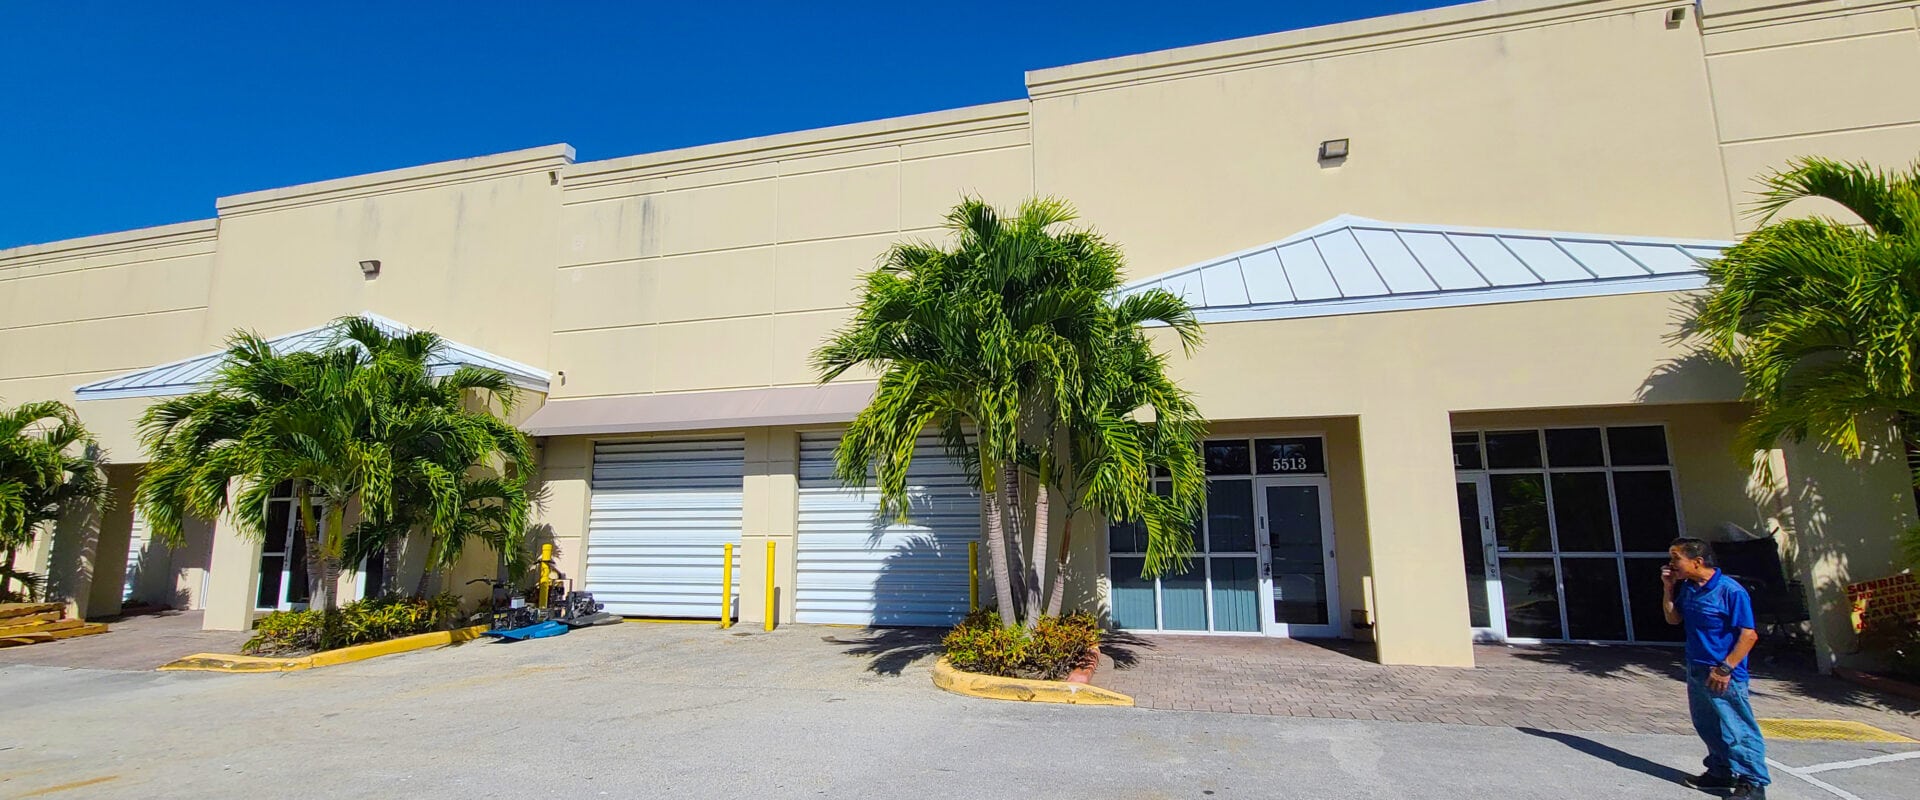 For Lease Flex Space 3,000 SF